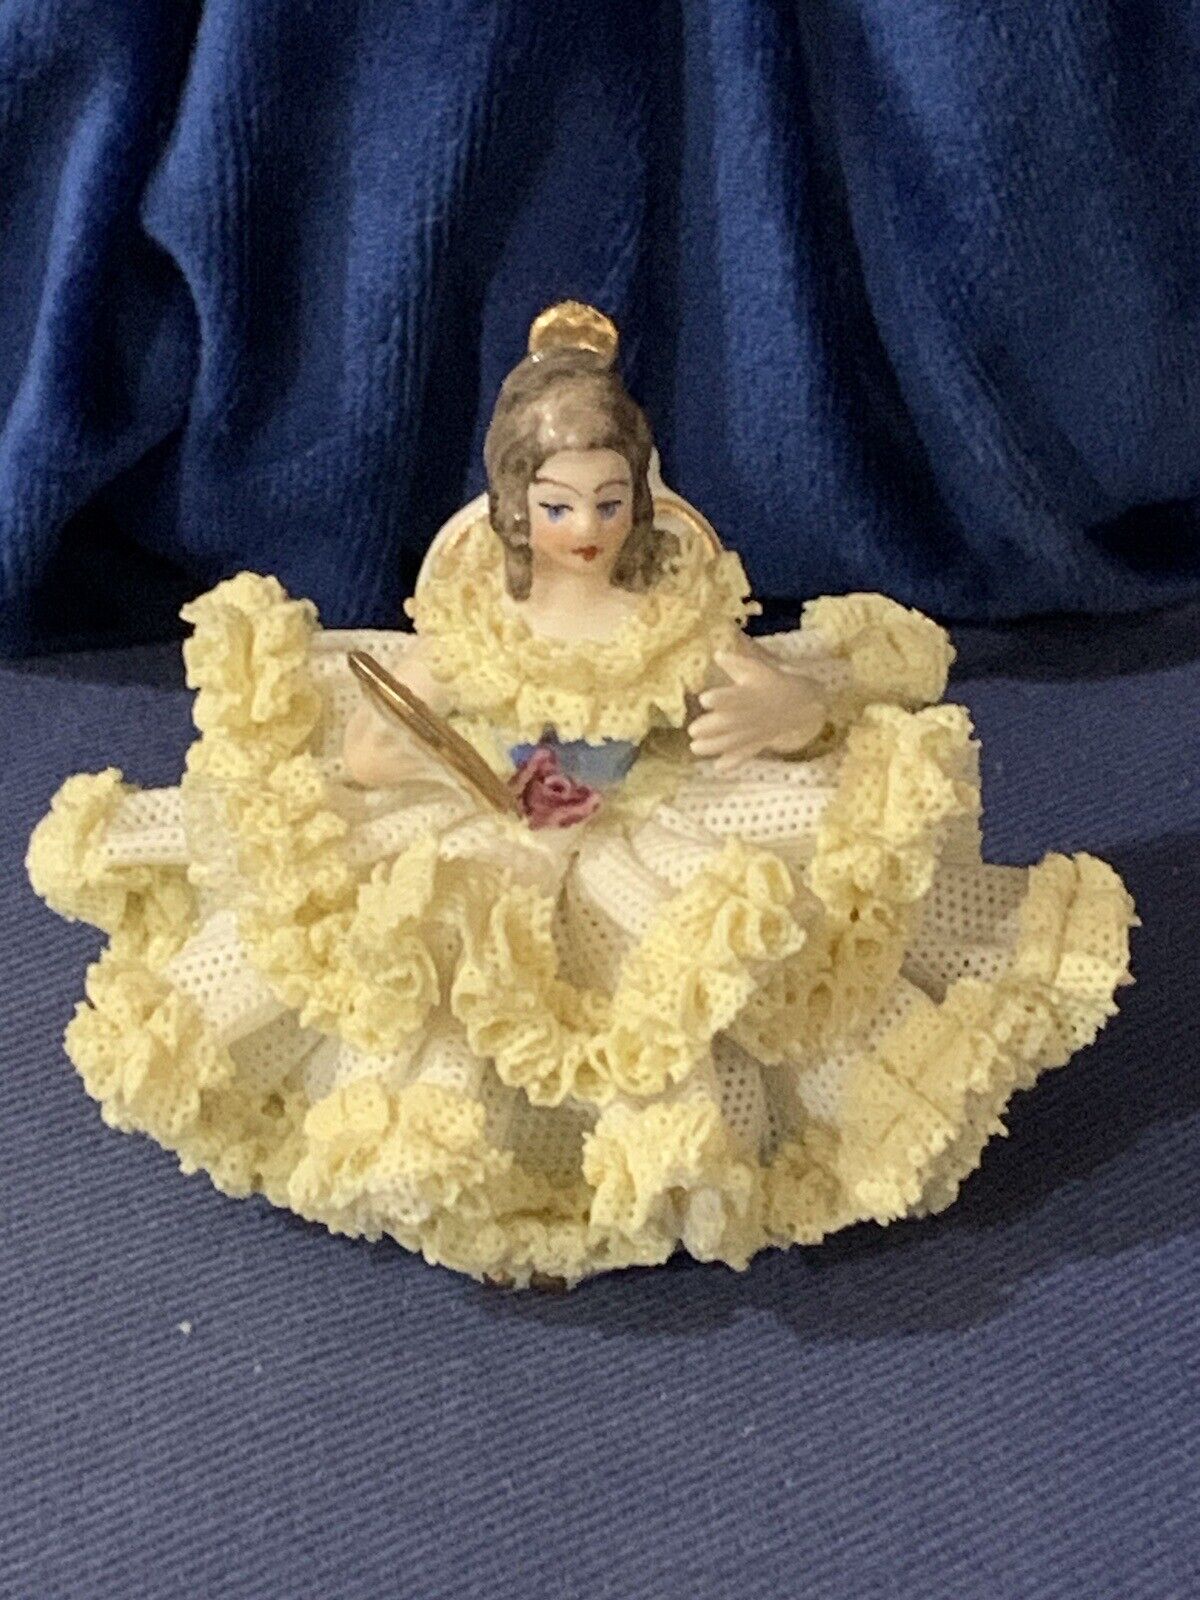 Vintage Irish Dresden Porcelain Figurine Lady In Chair Yellow Lace Dress 3”